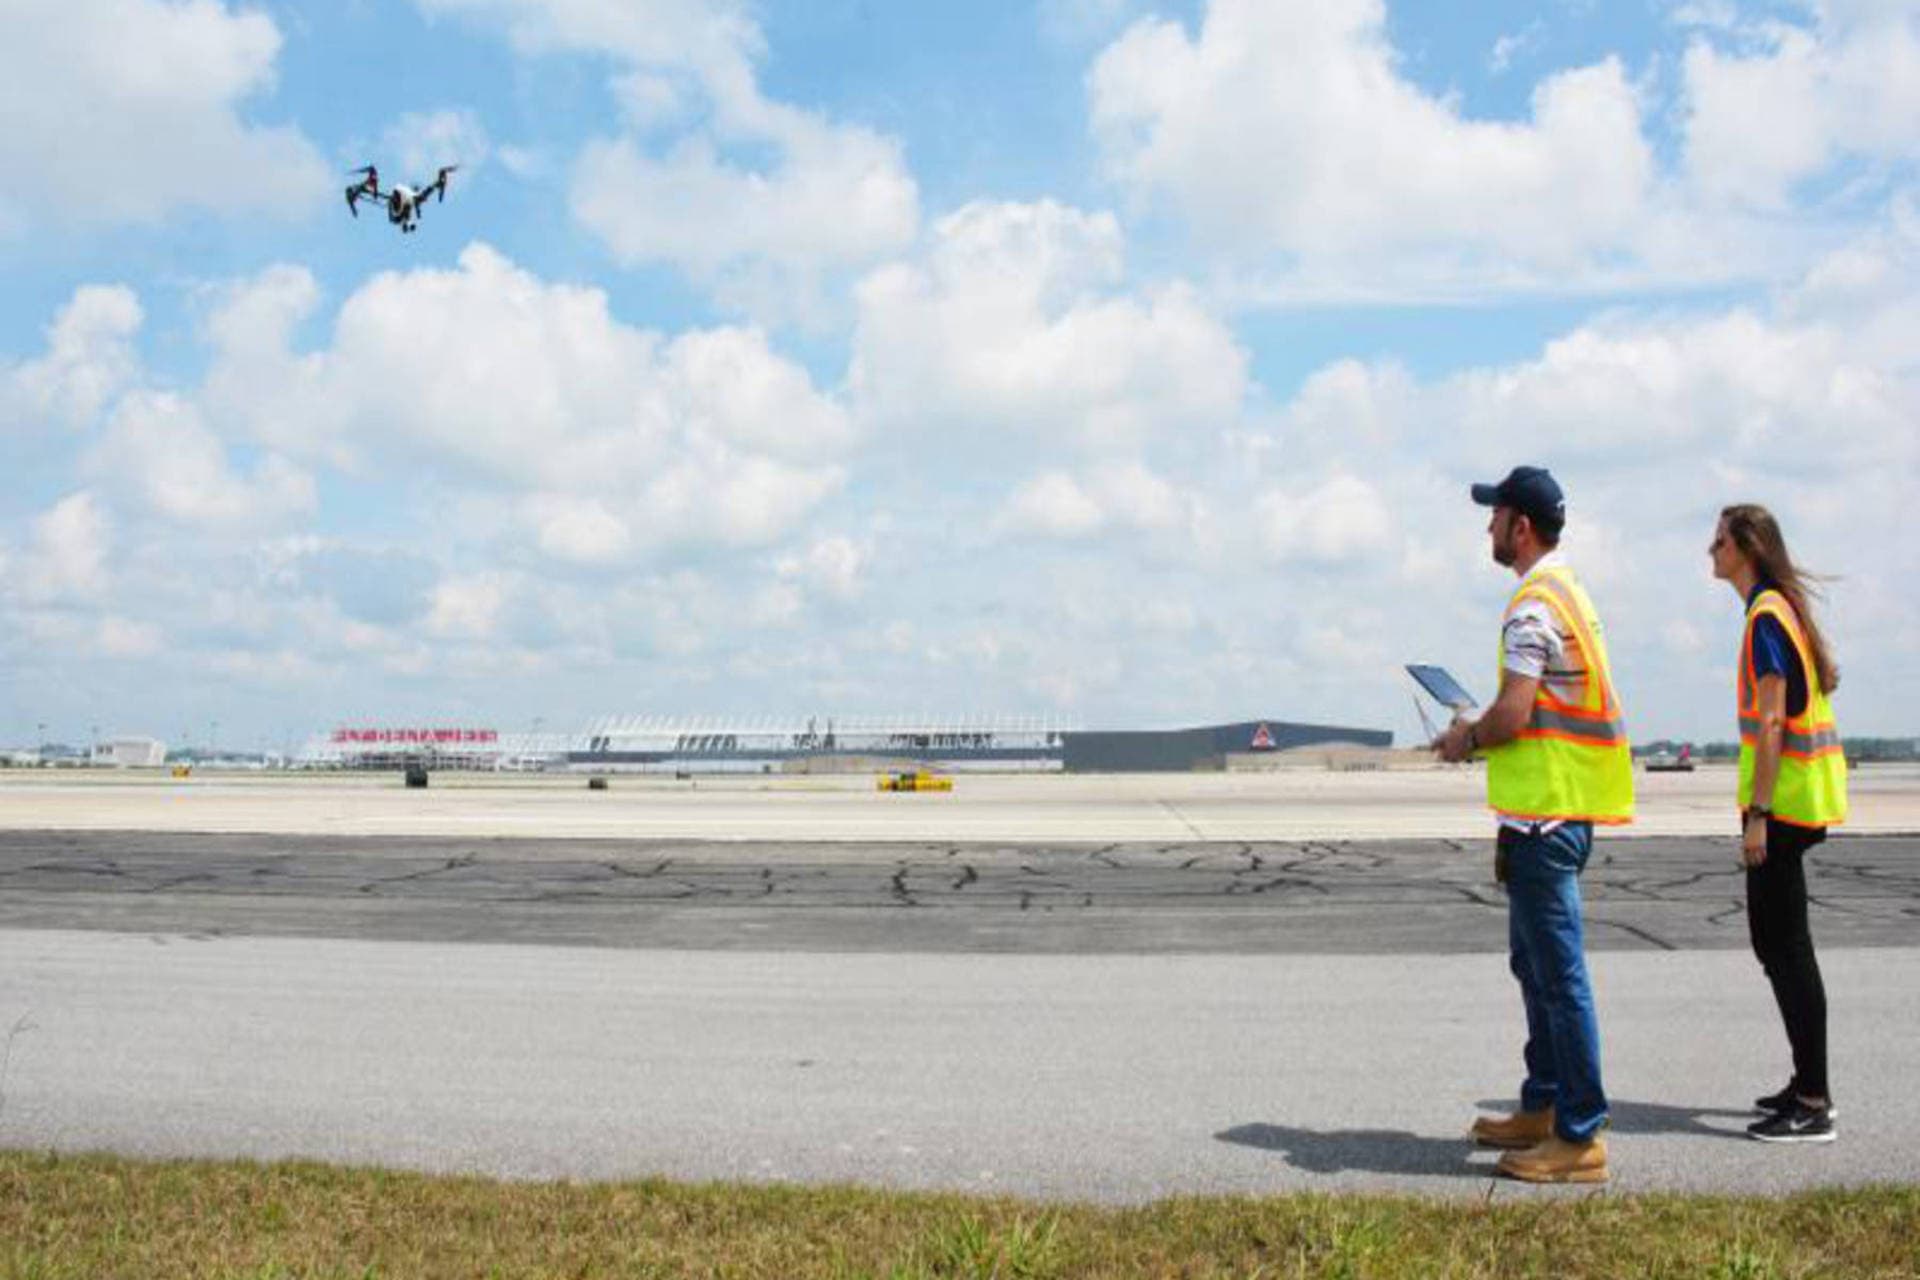 Atlanta’s Giant Airport Using Drones to Maintain Its Runways